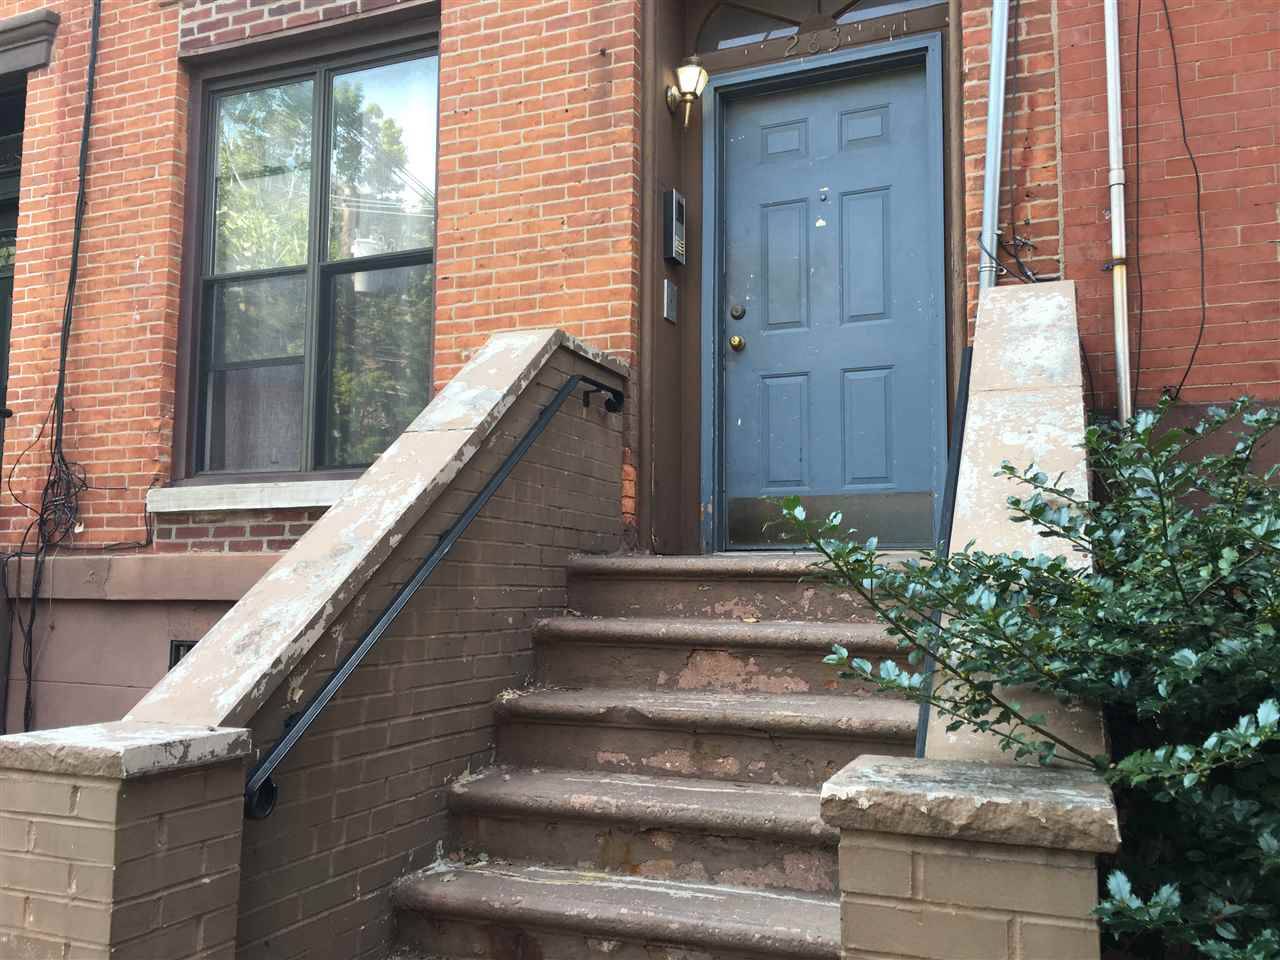 Nice 2 Bedroom in Van Vorst Park - Minutes to PATH - This Efficient 600sf Apartment Features Hardwood Floors